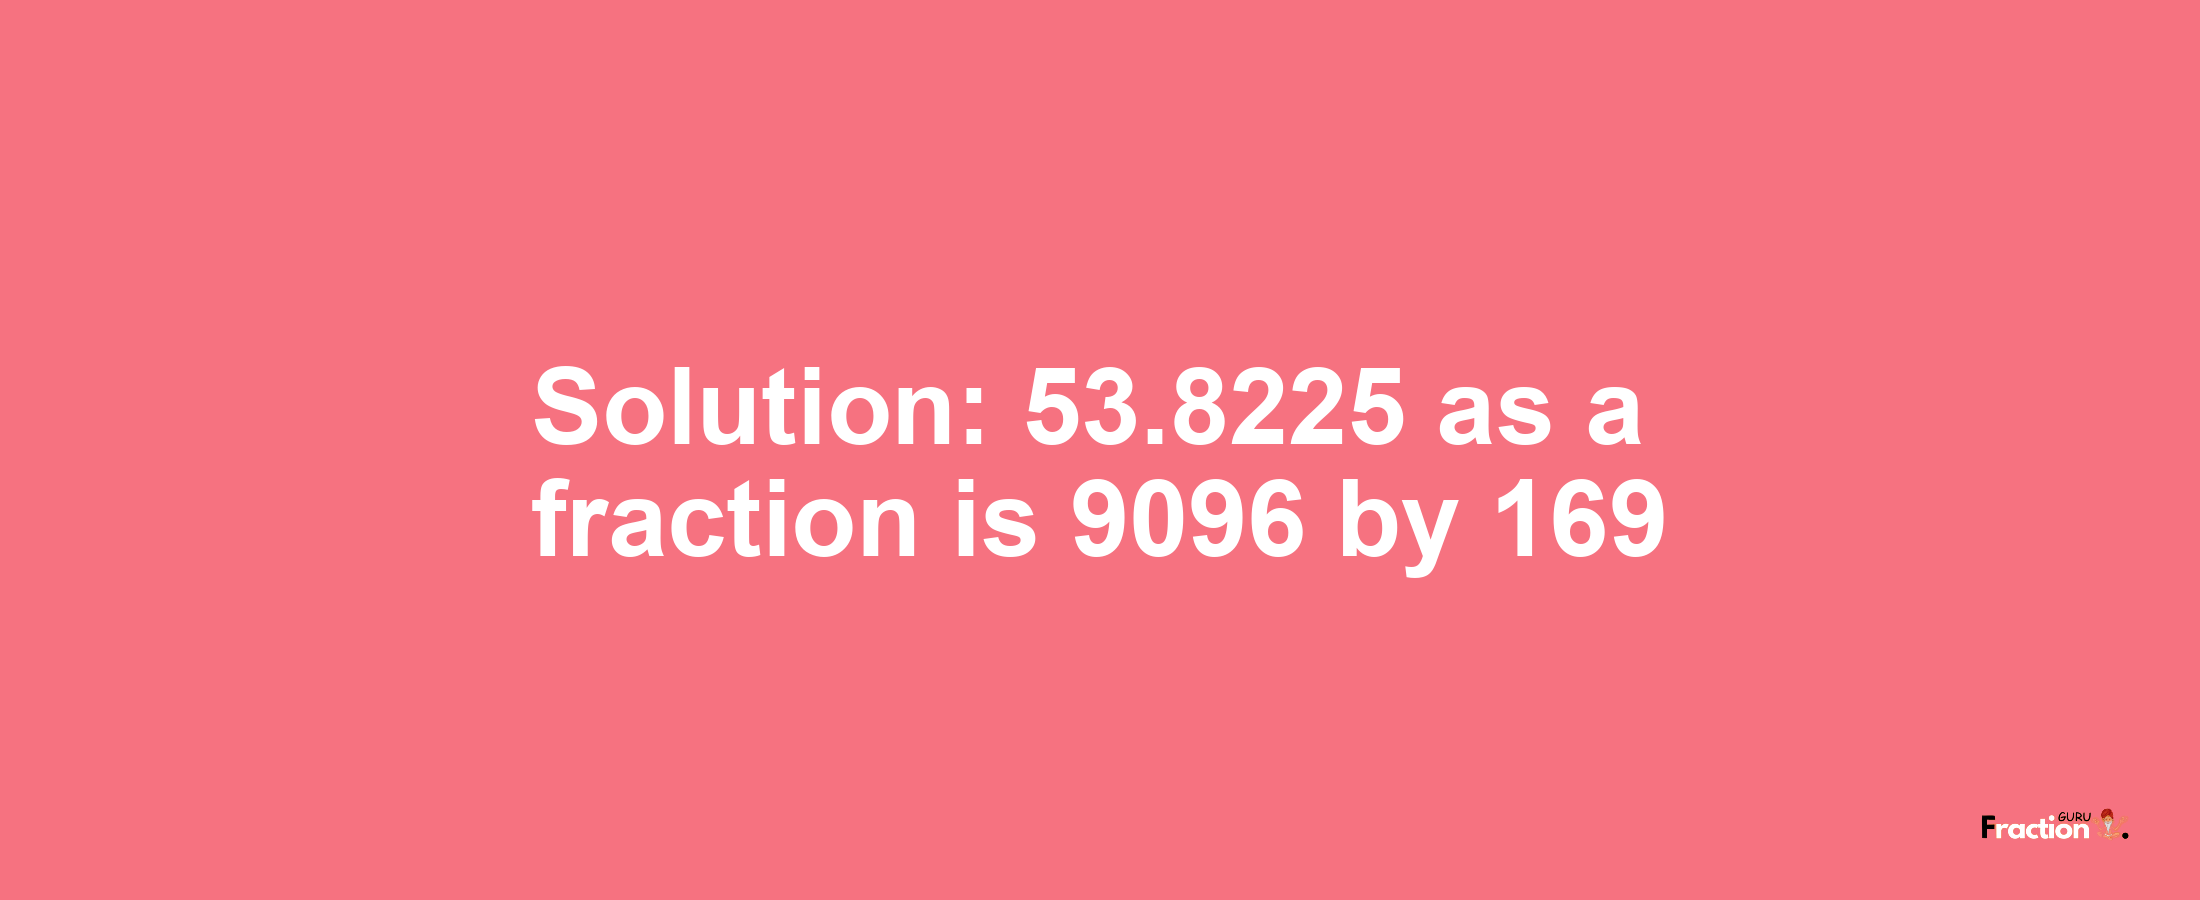 Solution:53.8225 as a fraction is 9096/169